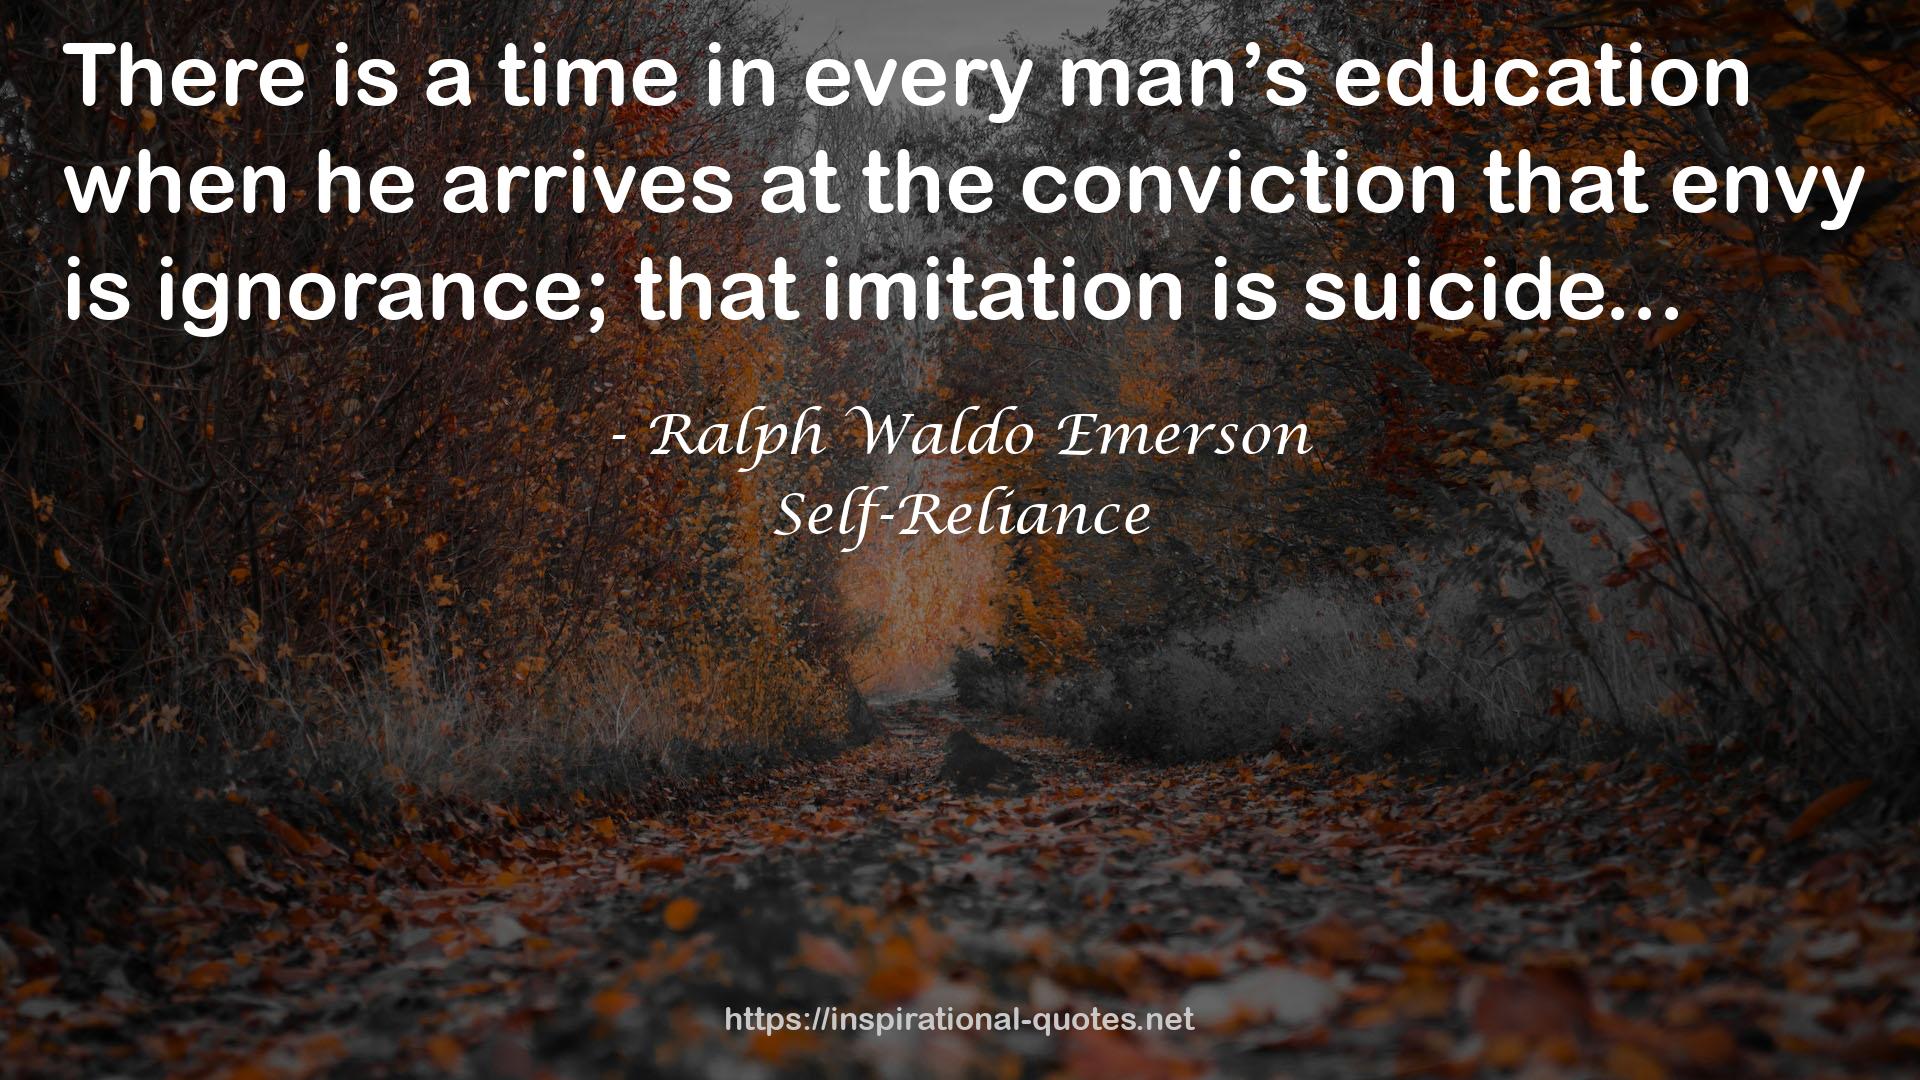 Self-Reliance QUOTES